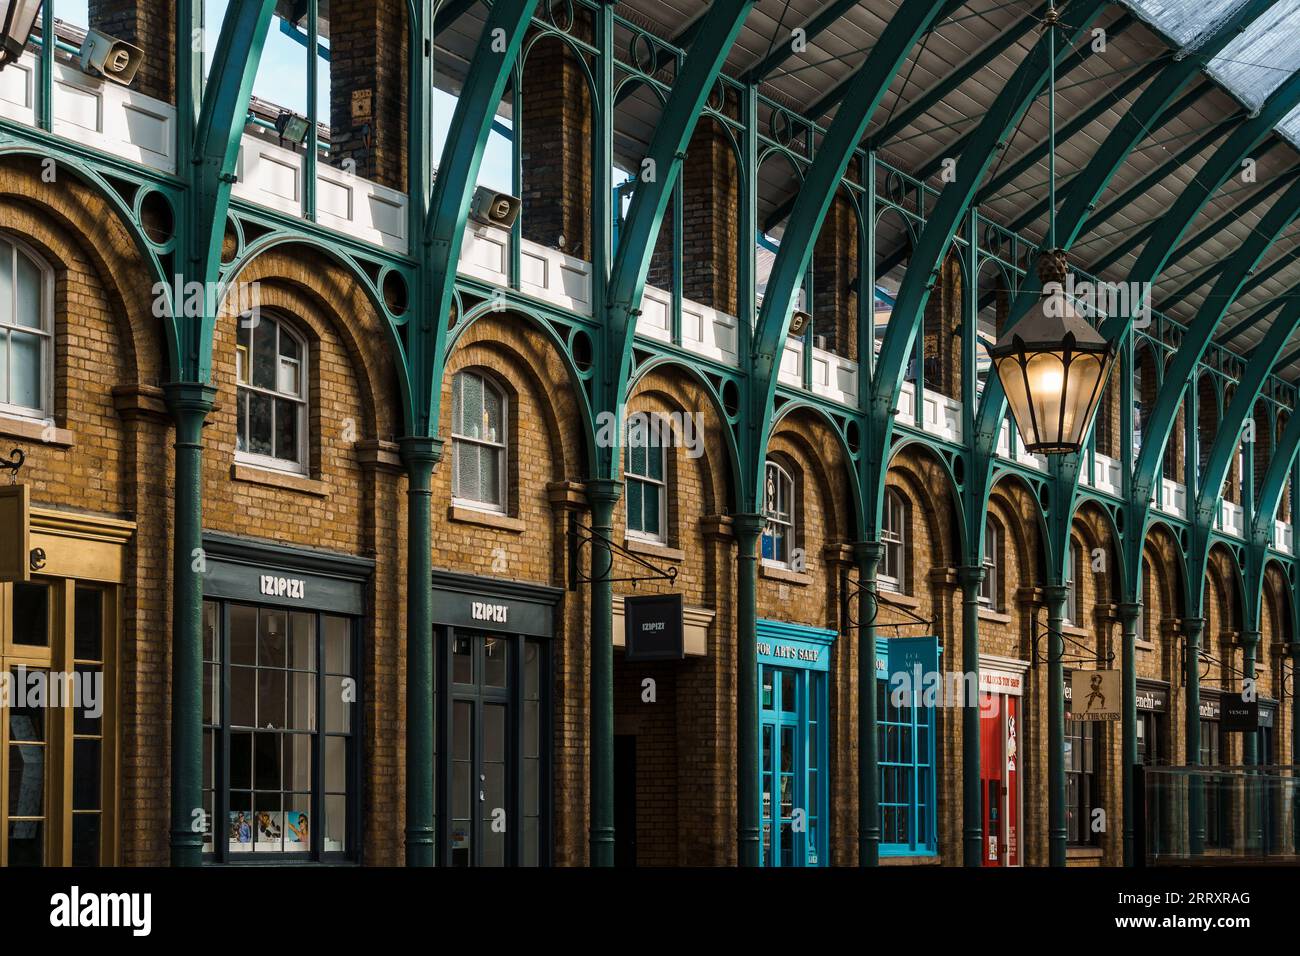 LONDON, UK - August 25, 2023: Interior view of Covent Garden Market. Located in the West End of London, Covent Garden is renowned for its luxury fashi Stock Photo